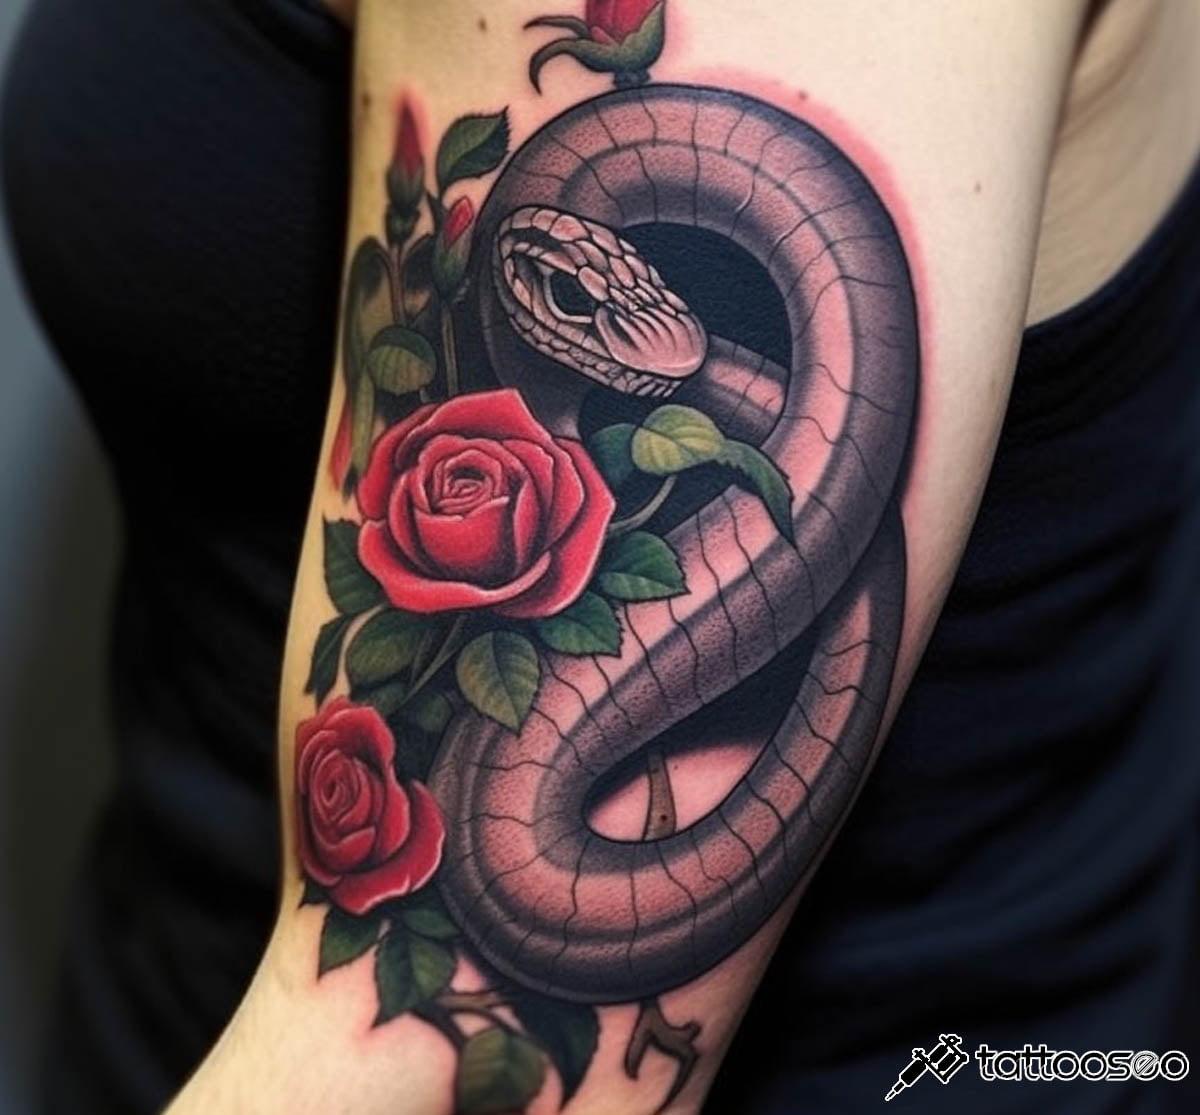 Snake and rose tattoo meaning